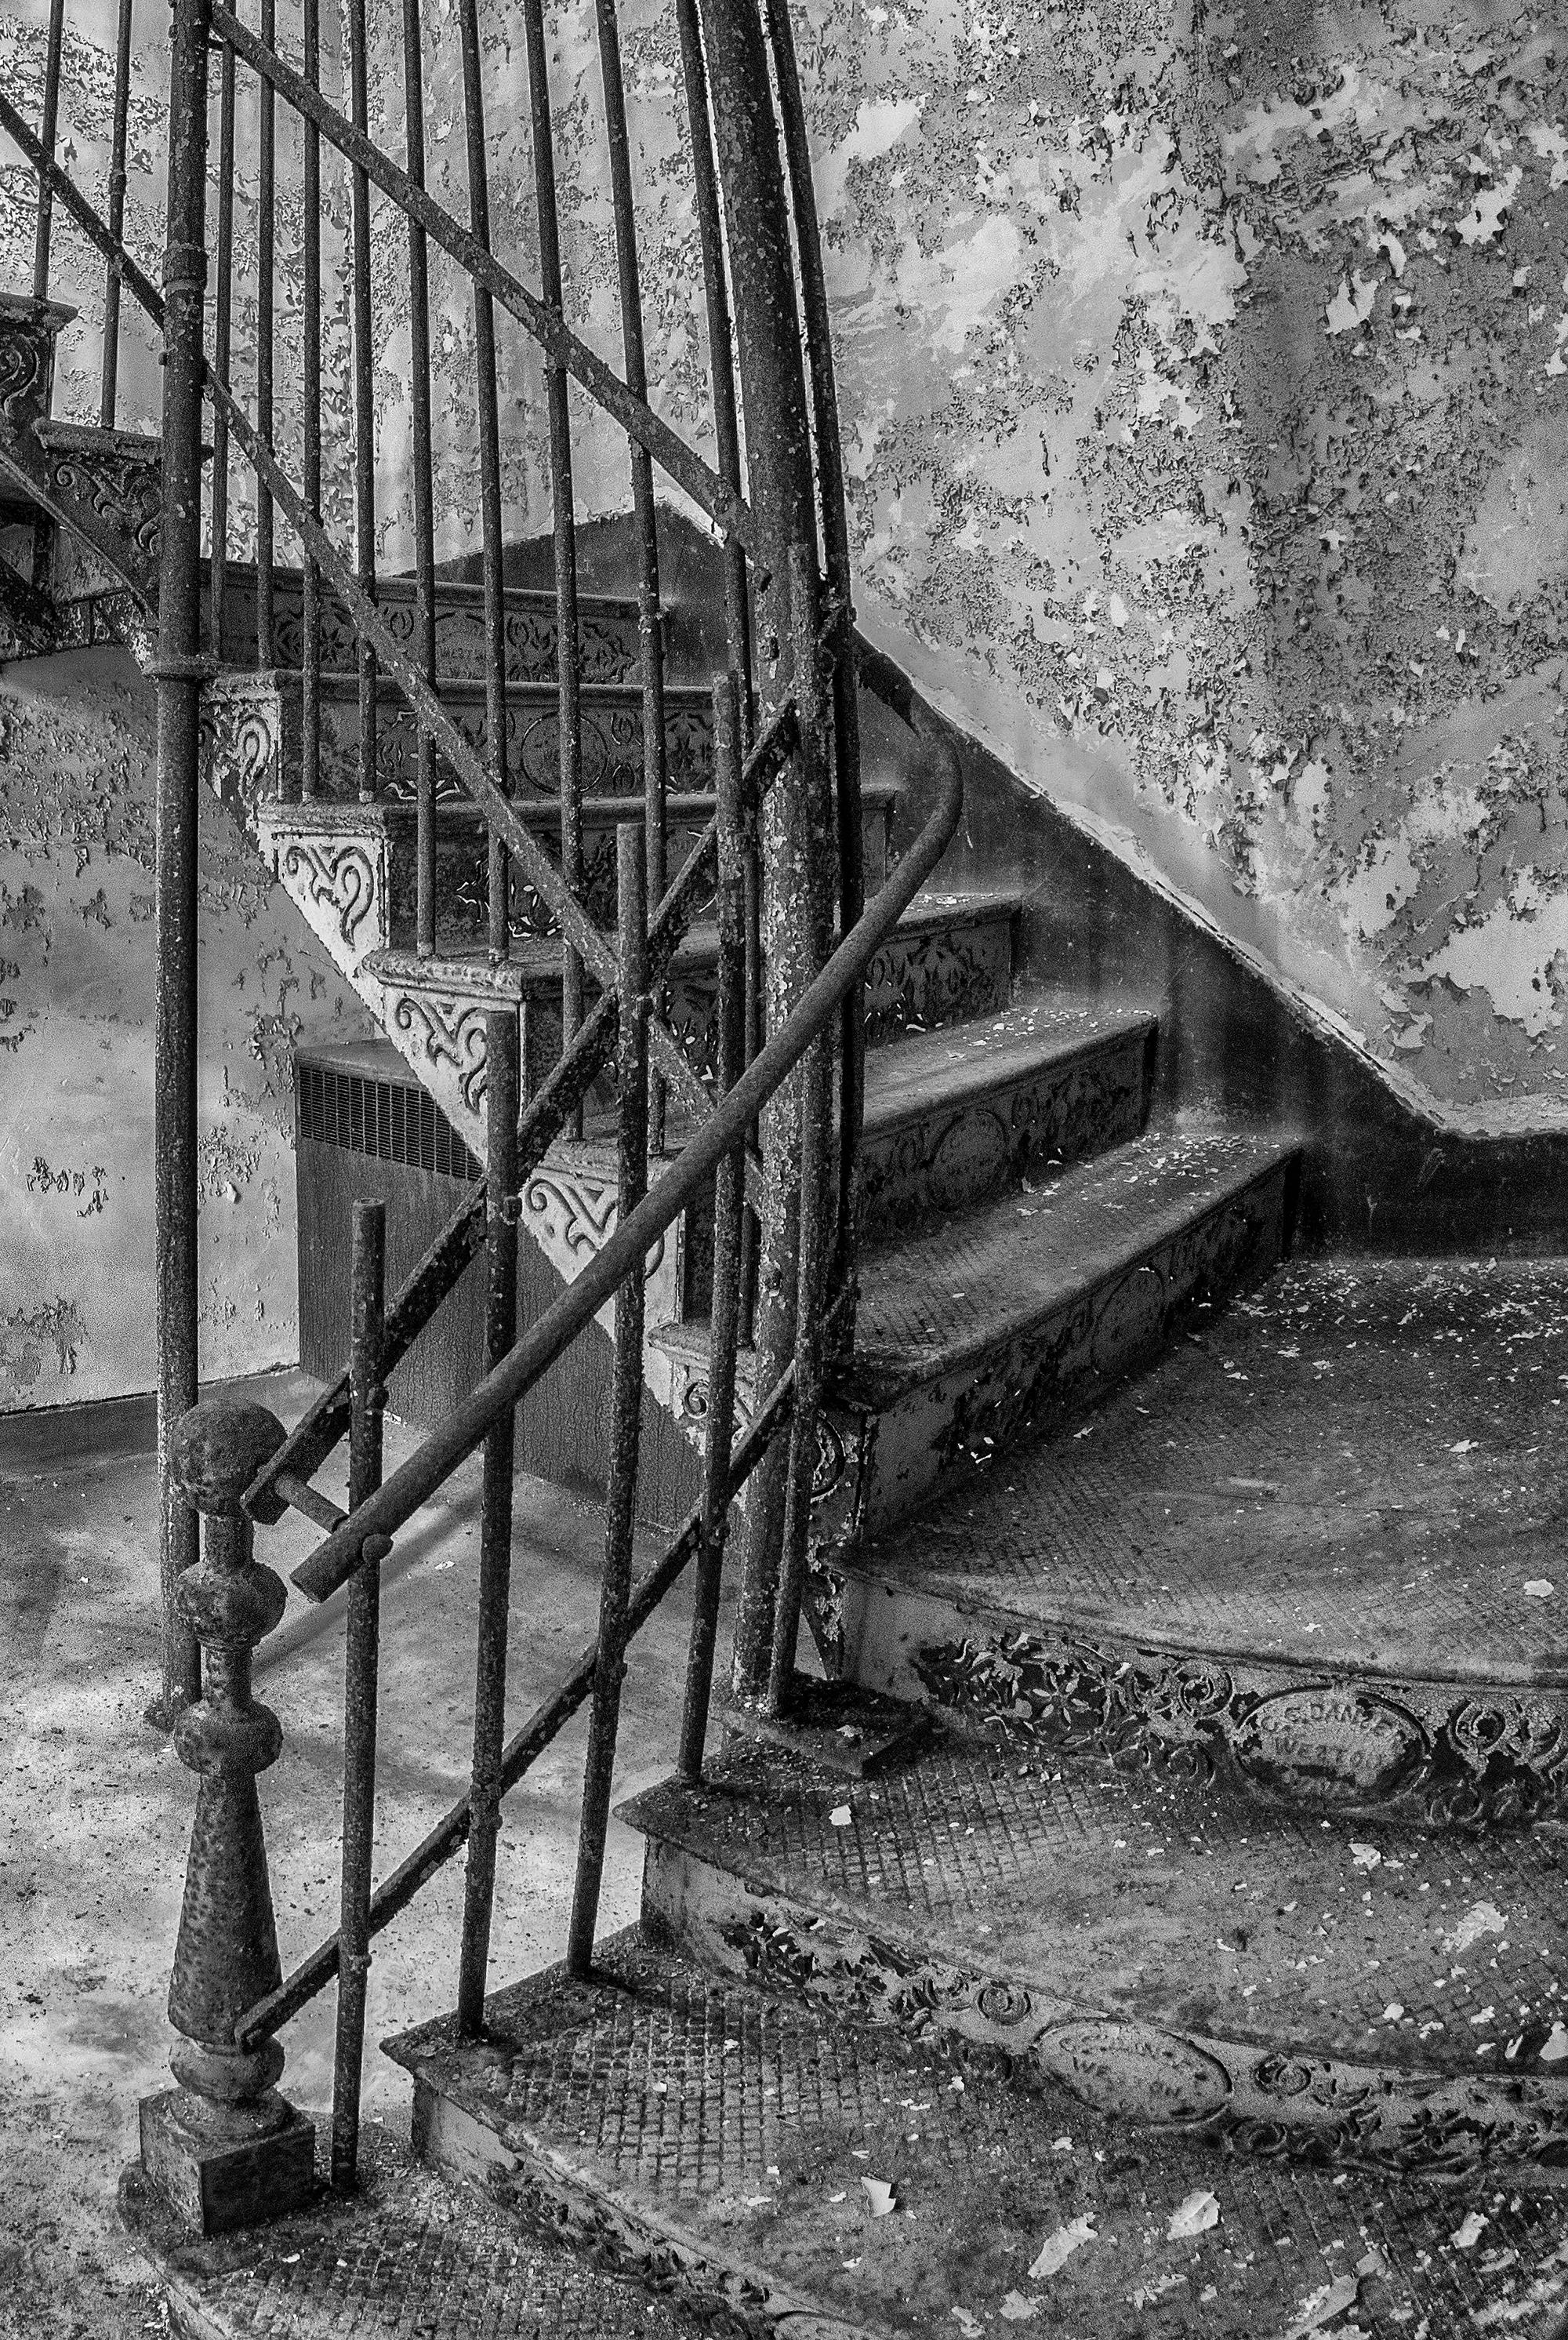 Rebecca Skinner’s “Stairway” was photographed at an abandoned asylum and is part of her “Forgotten” series raising mental health awareness. A fisheye lens gives the ornate, iron staircase a never ending feeling. Patterned cutouts in the steel risers